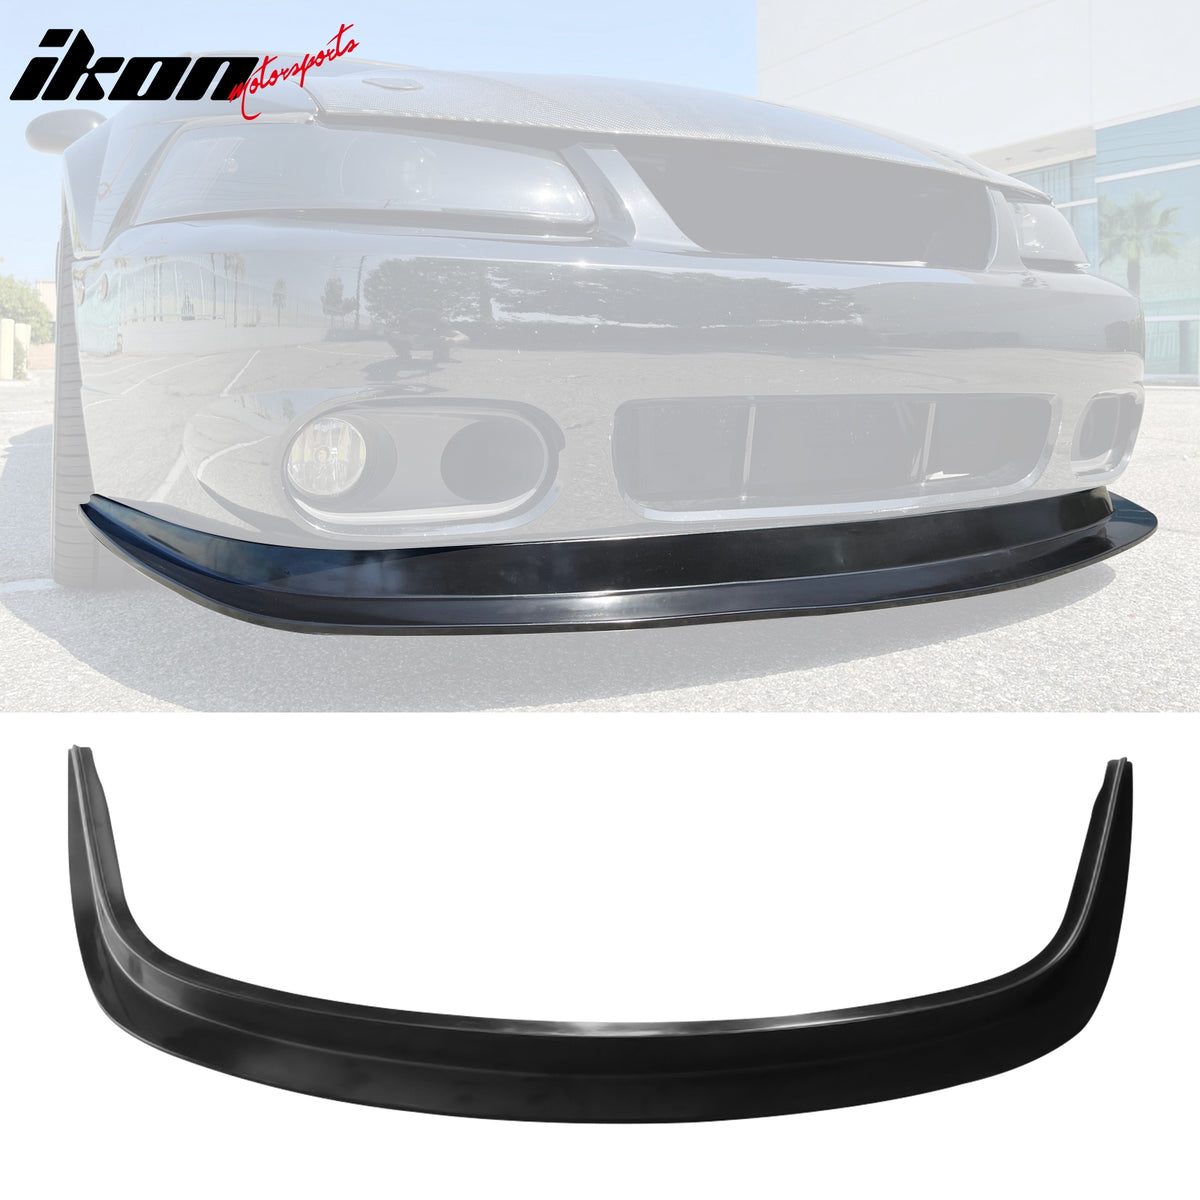 IKON MOTORSPORTS, Front Bumper Cover W/ Lip Compatible With 1999-2004 Ford Mustang, MDA Cobra Style PU Polyurethane Front Bumper Cover Conversion Replacement With MDA Style Front Bumper Lip Spacers